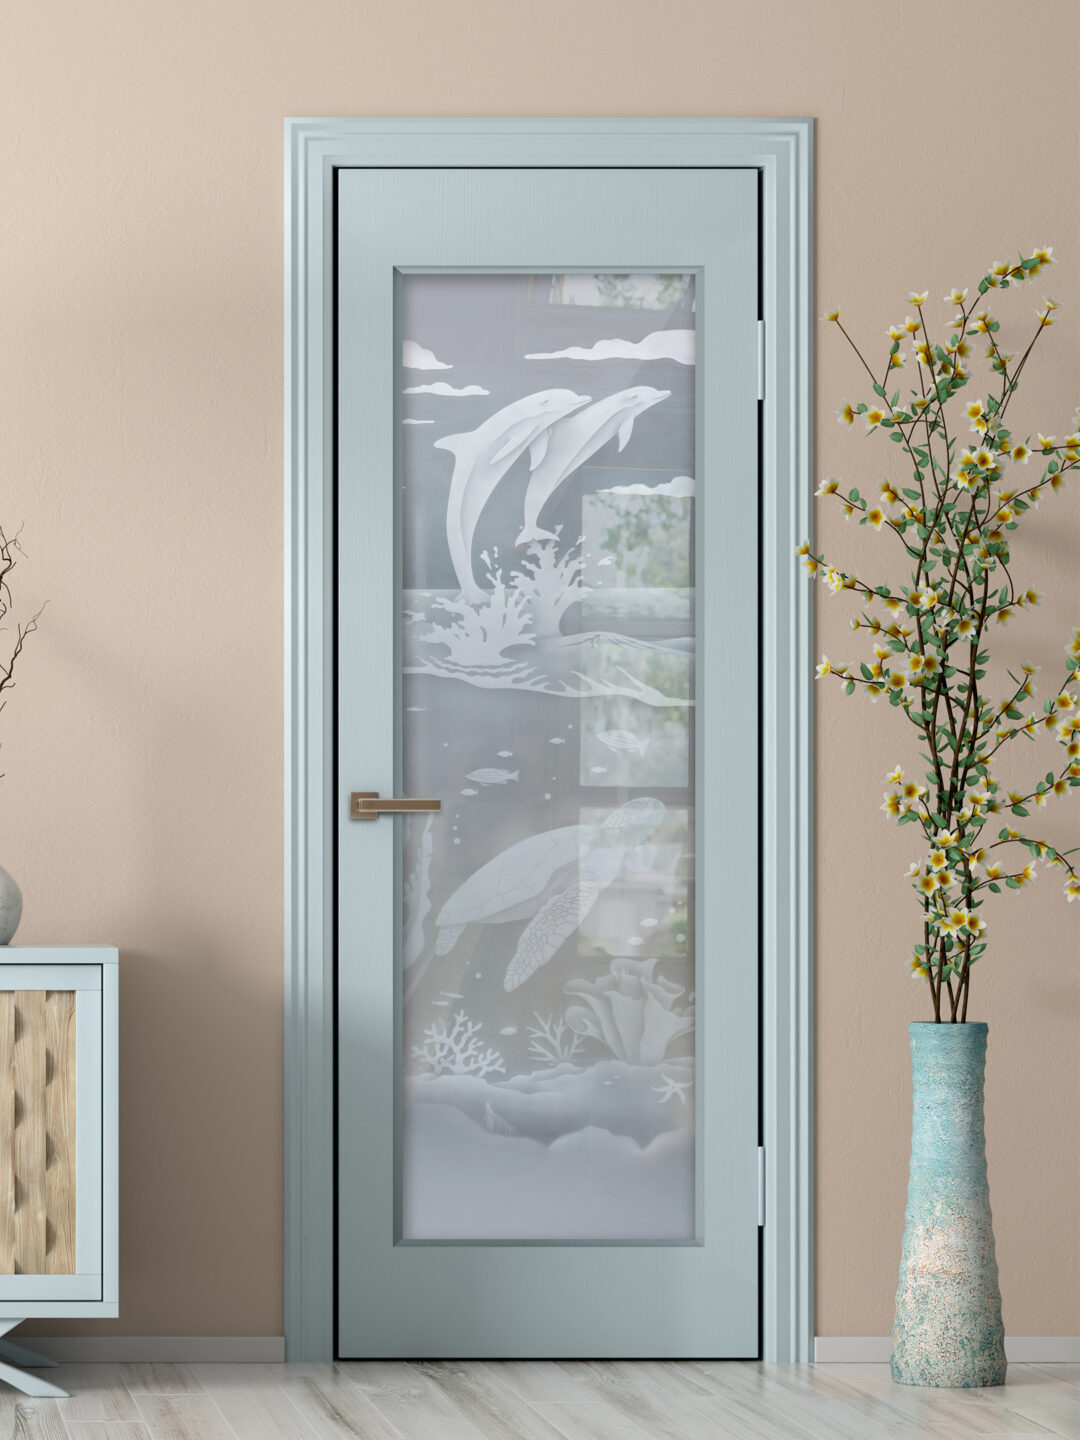 Dolphins Leaping & Sea Turtle Private 2D Frosted Glass Finish Pantry Door Coastal Oceanic Design Style Pantry Doors Sans Soucie